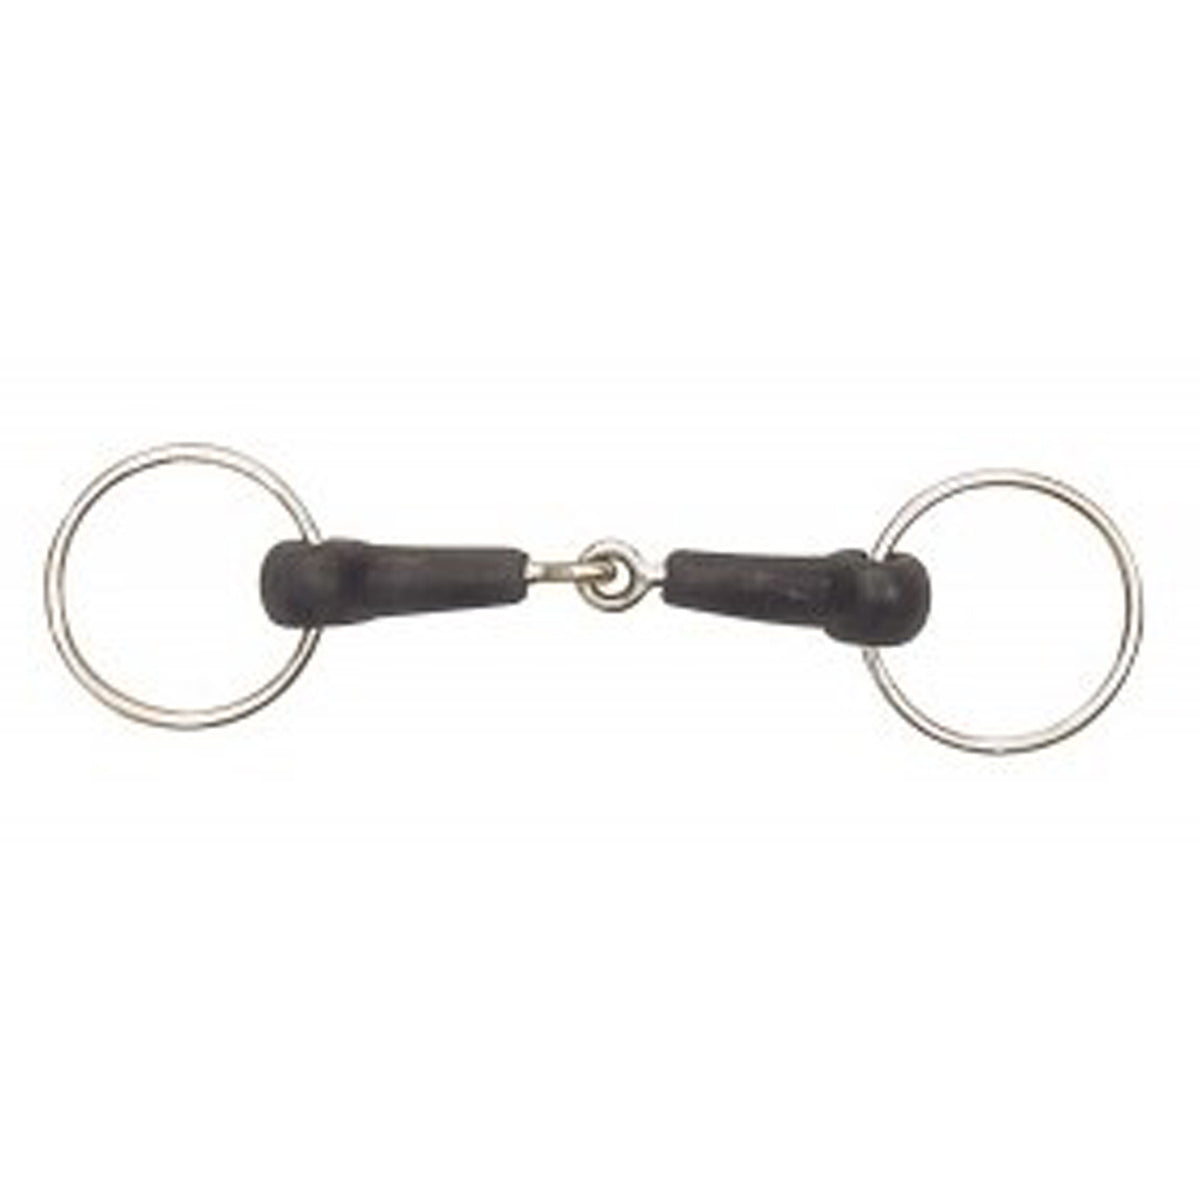 Centaur Jointed Soft Rubber Loose Ring Bit